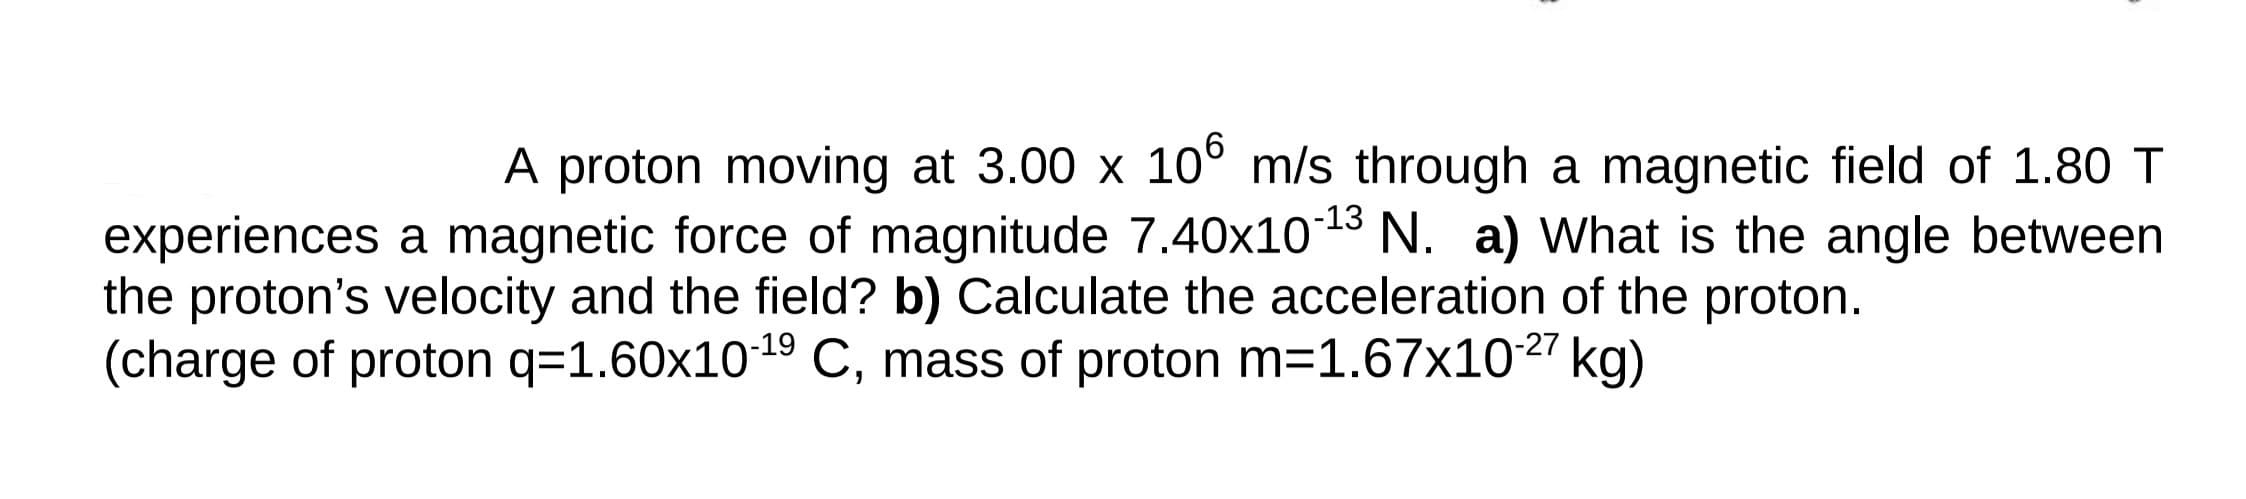 A proton moving at 3.00 x 10° m/s through a magnetic field of 1.80 T
experiences a magnetic force of magnitude 7.40x10-13 N. a) What is the angle between
the proton's velocity and the field? b) Calculate the acceleration of the proton.
(charge of proton q=1.60x1019 C, mass of proton m=1.67x1027 kg)
